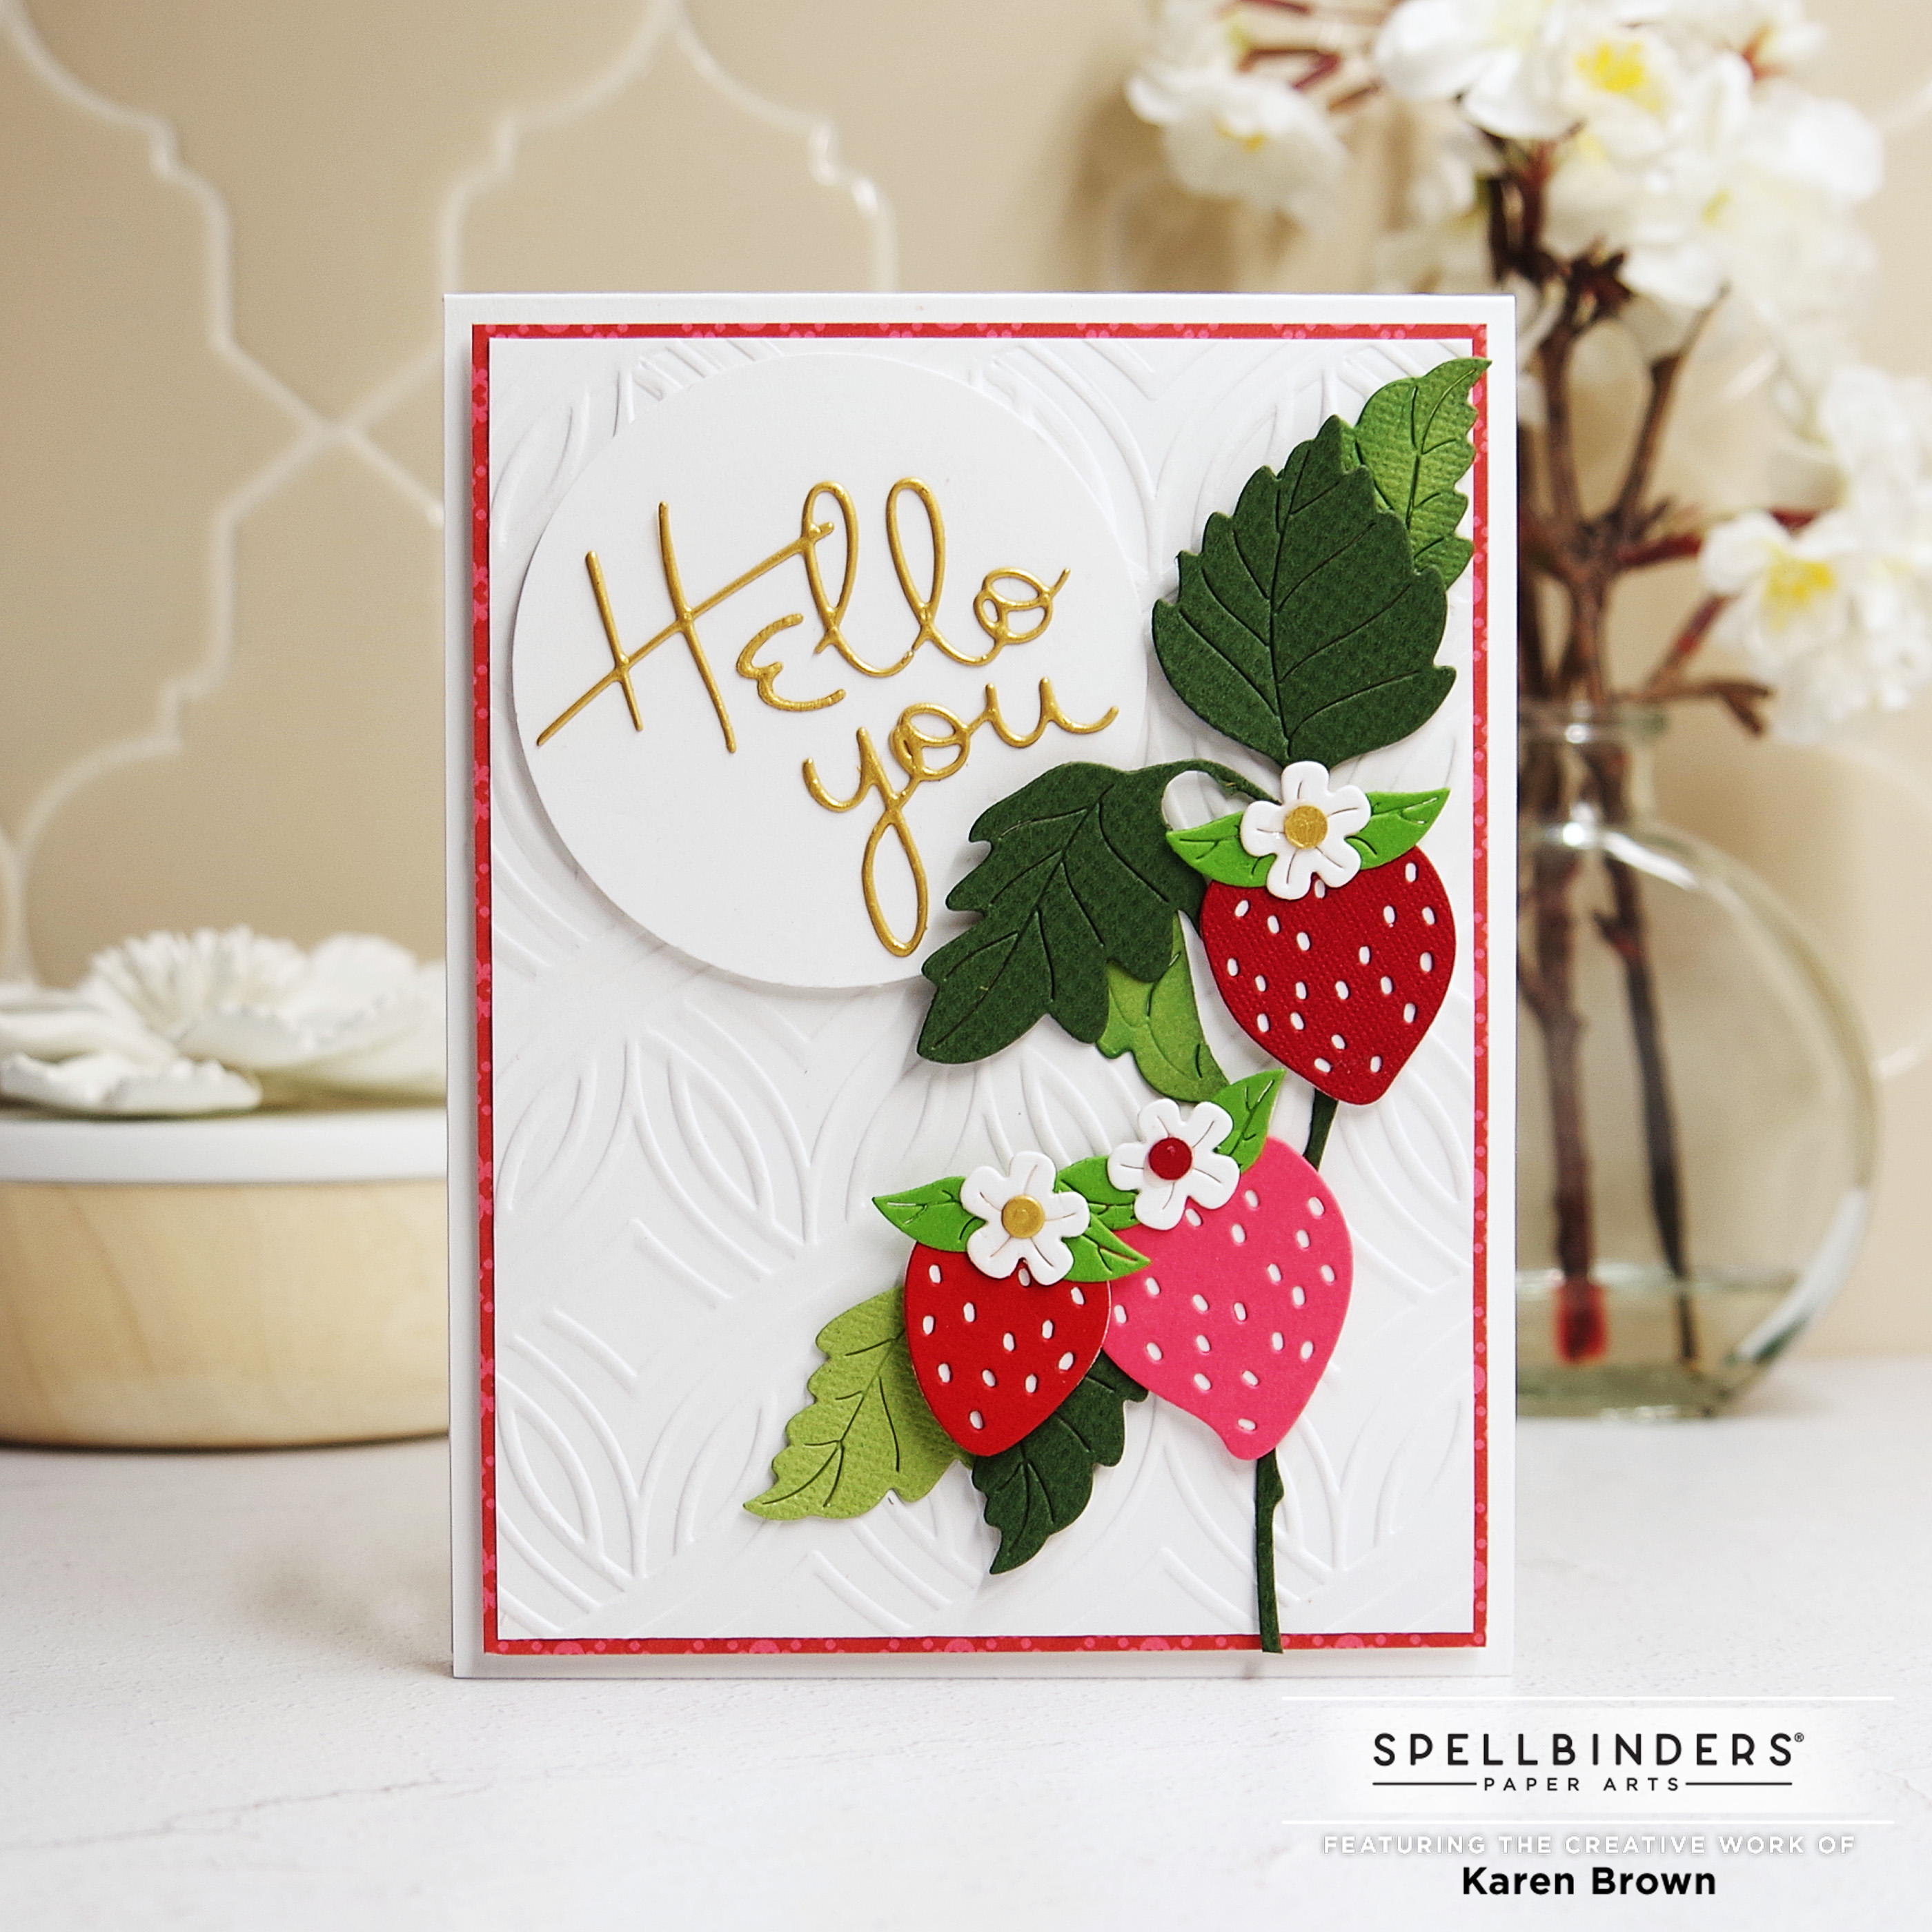 Spellbinders Outlined Sentiments Hello You Card.